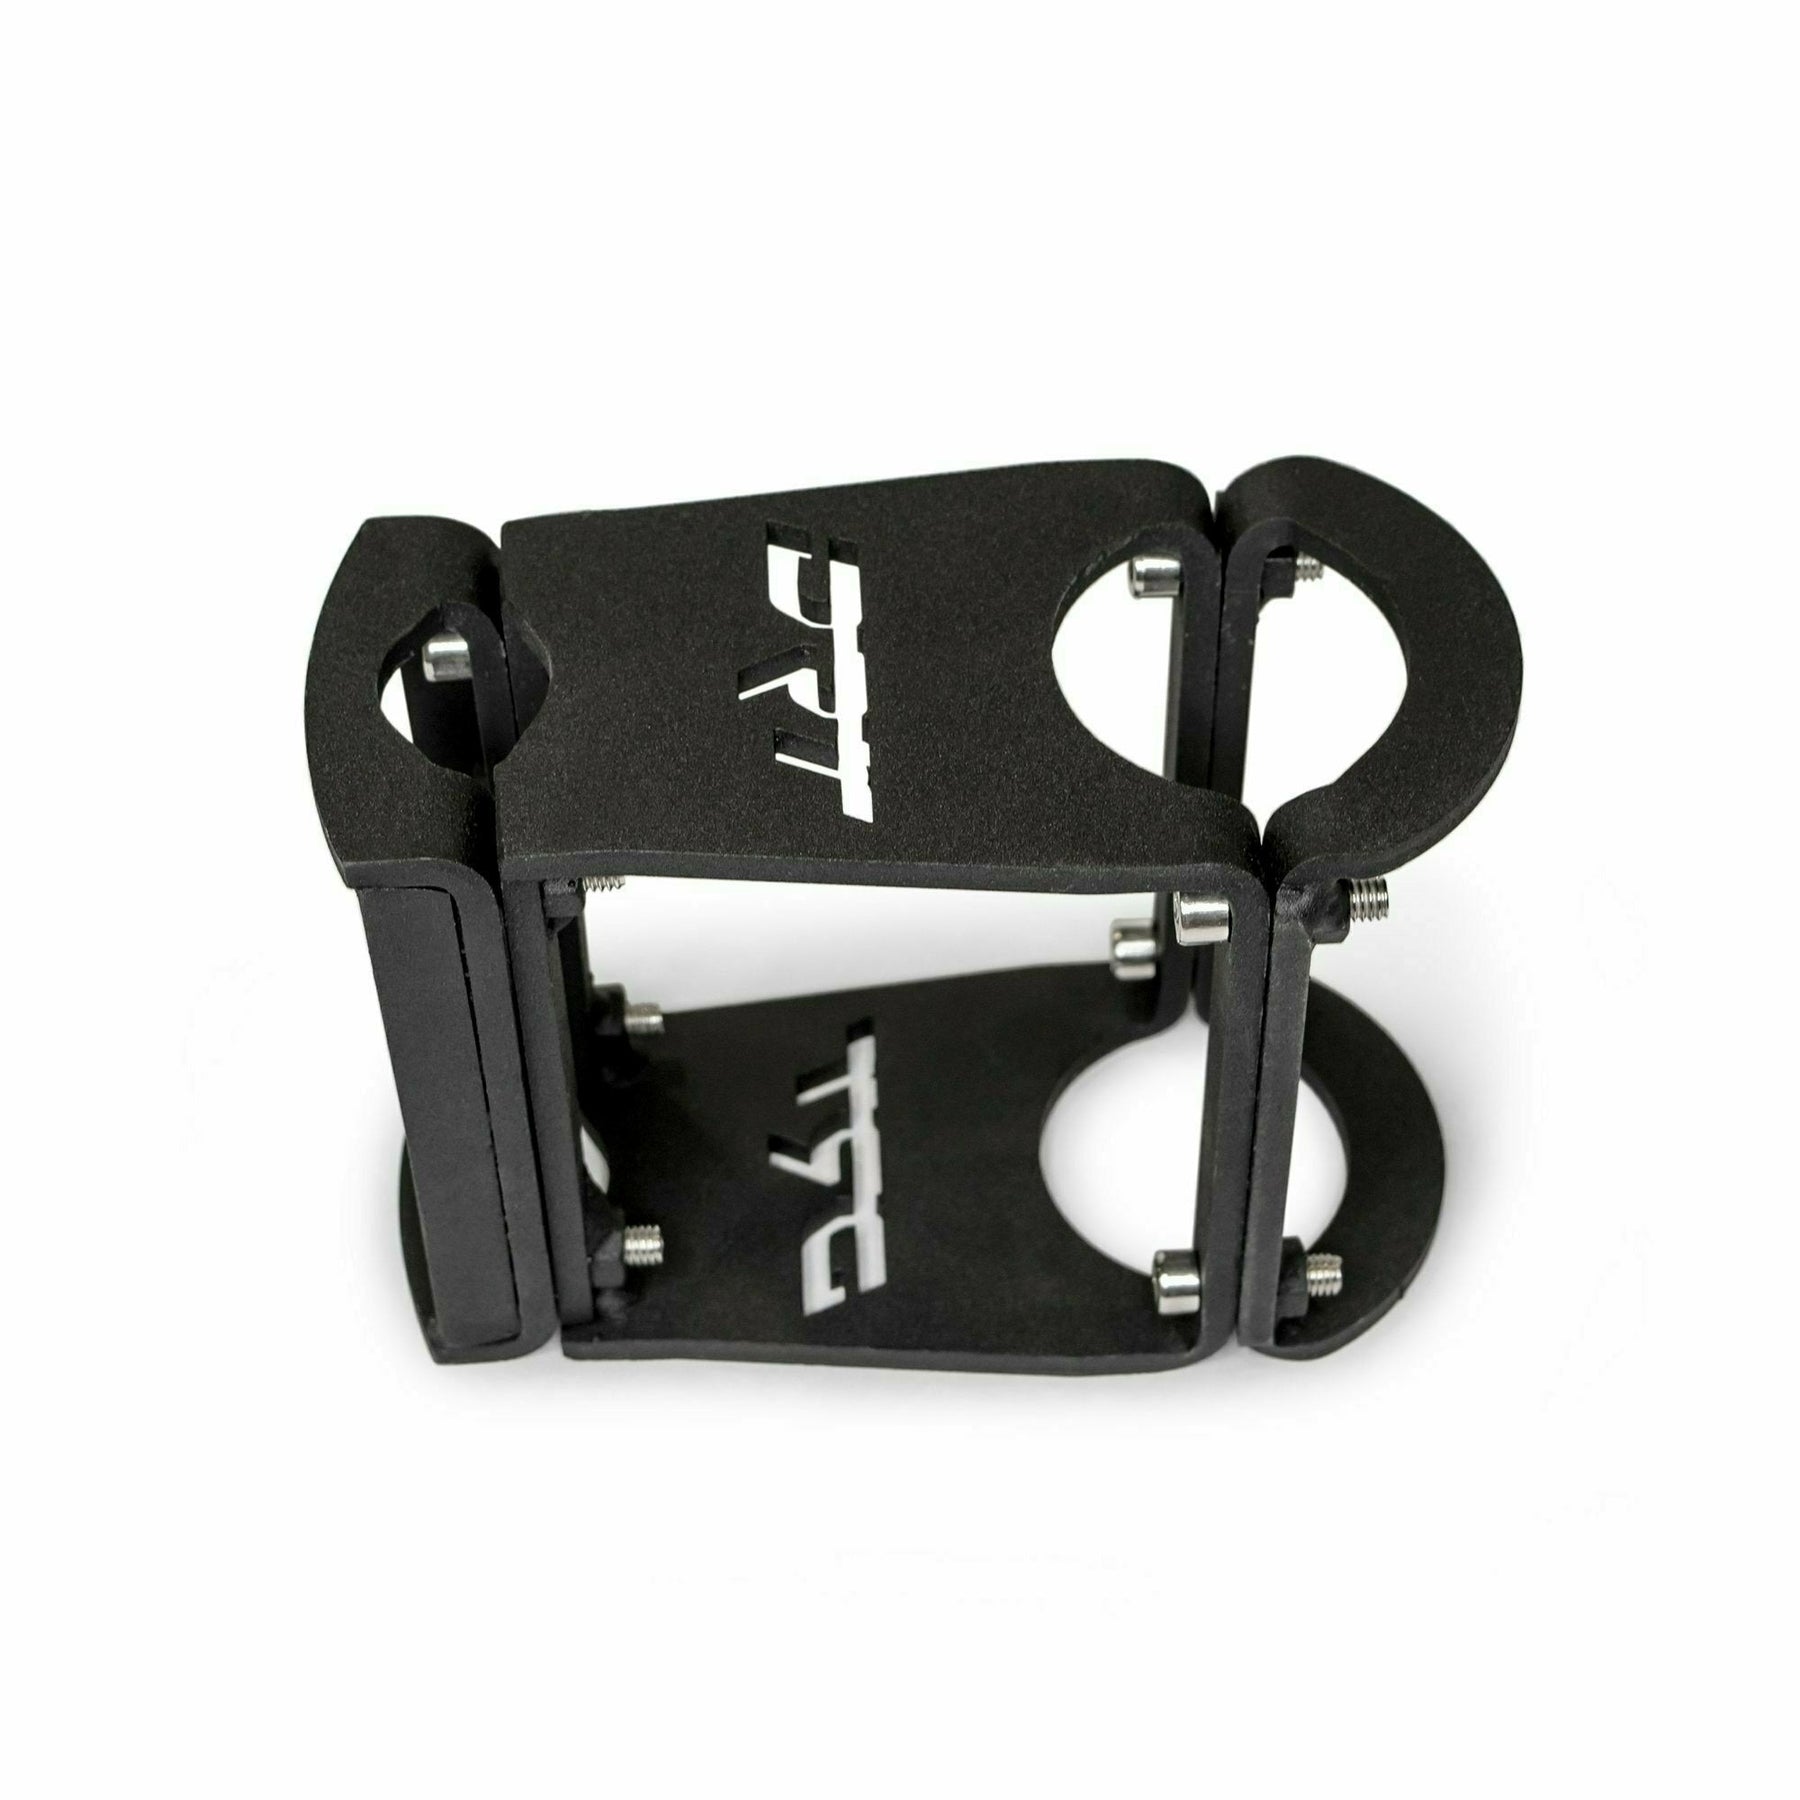 DRT Motorsports 2" Spare Axle Cage Mount